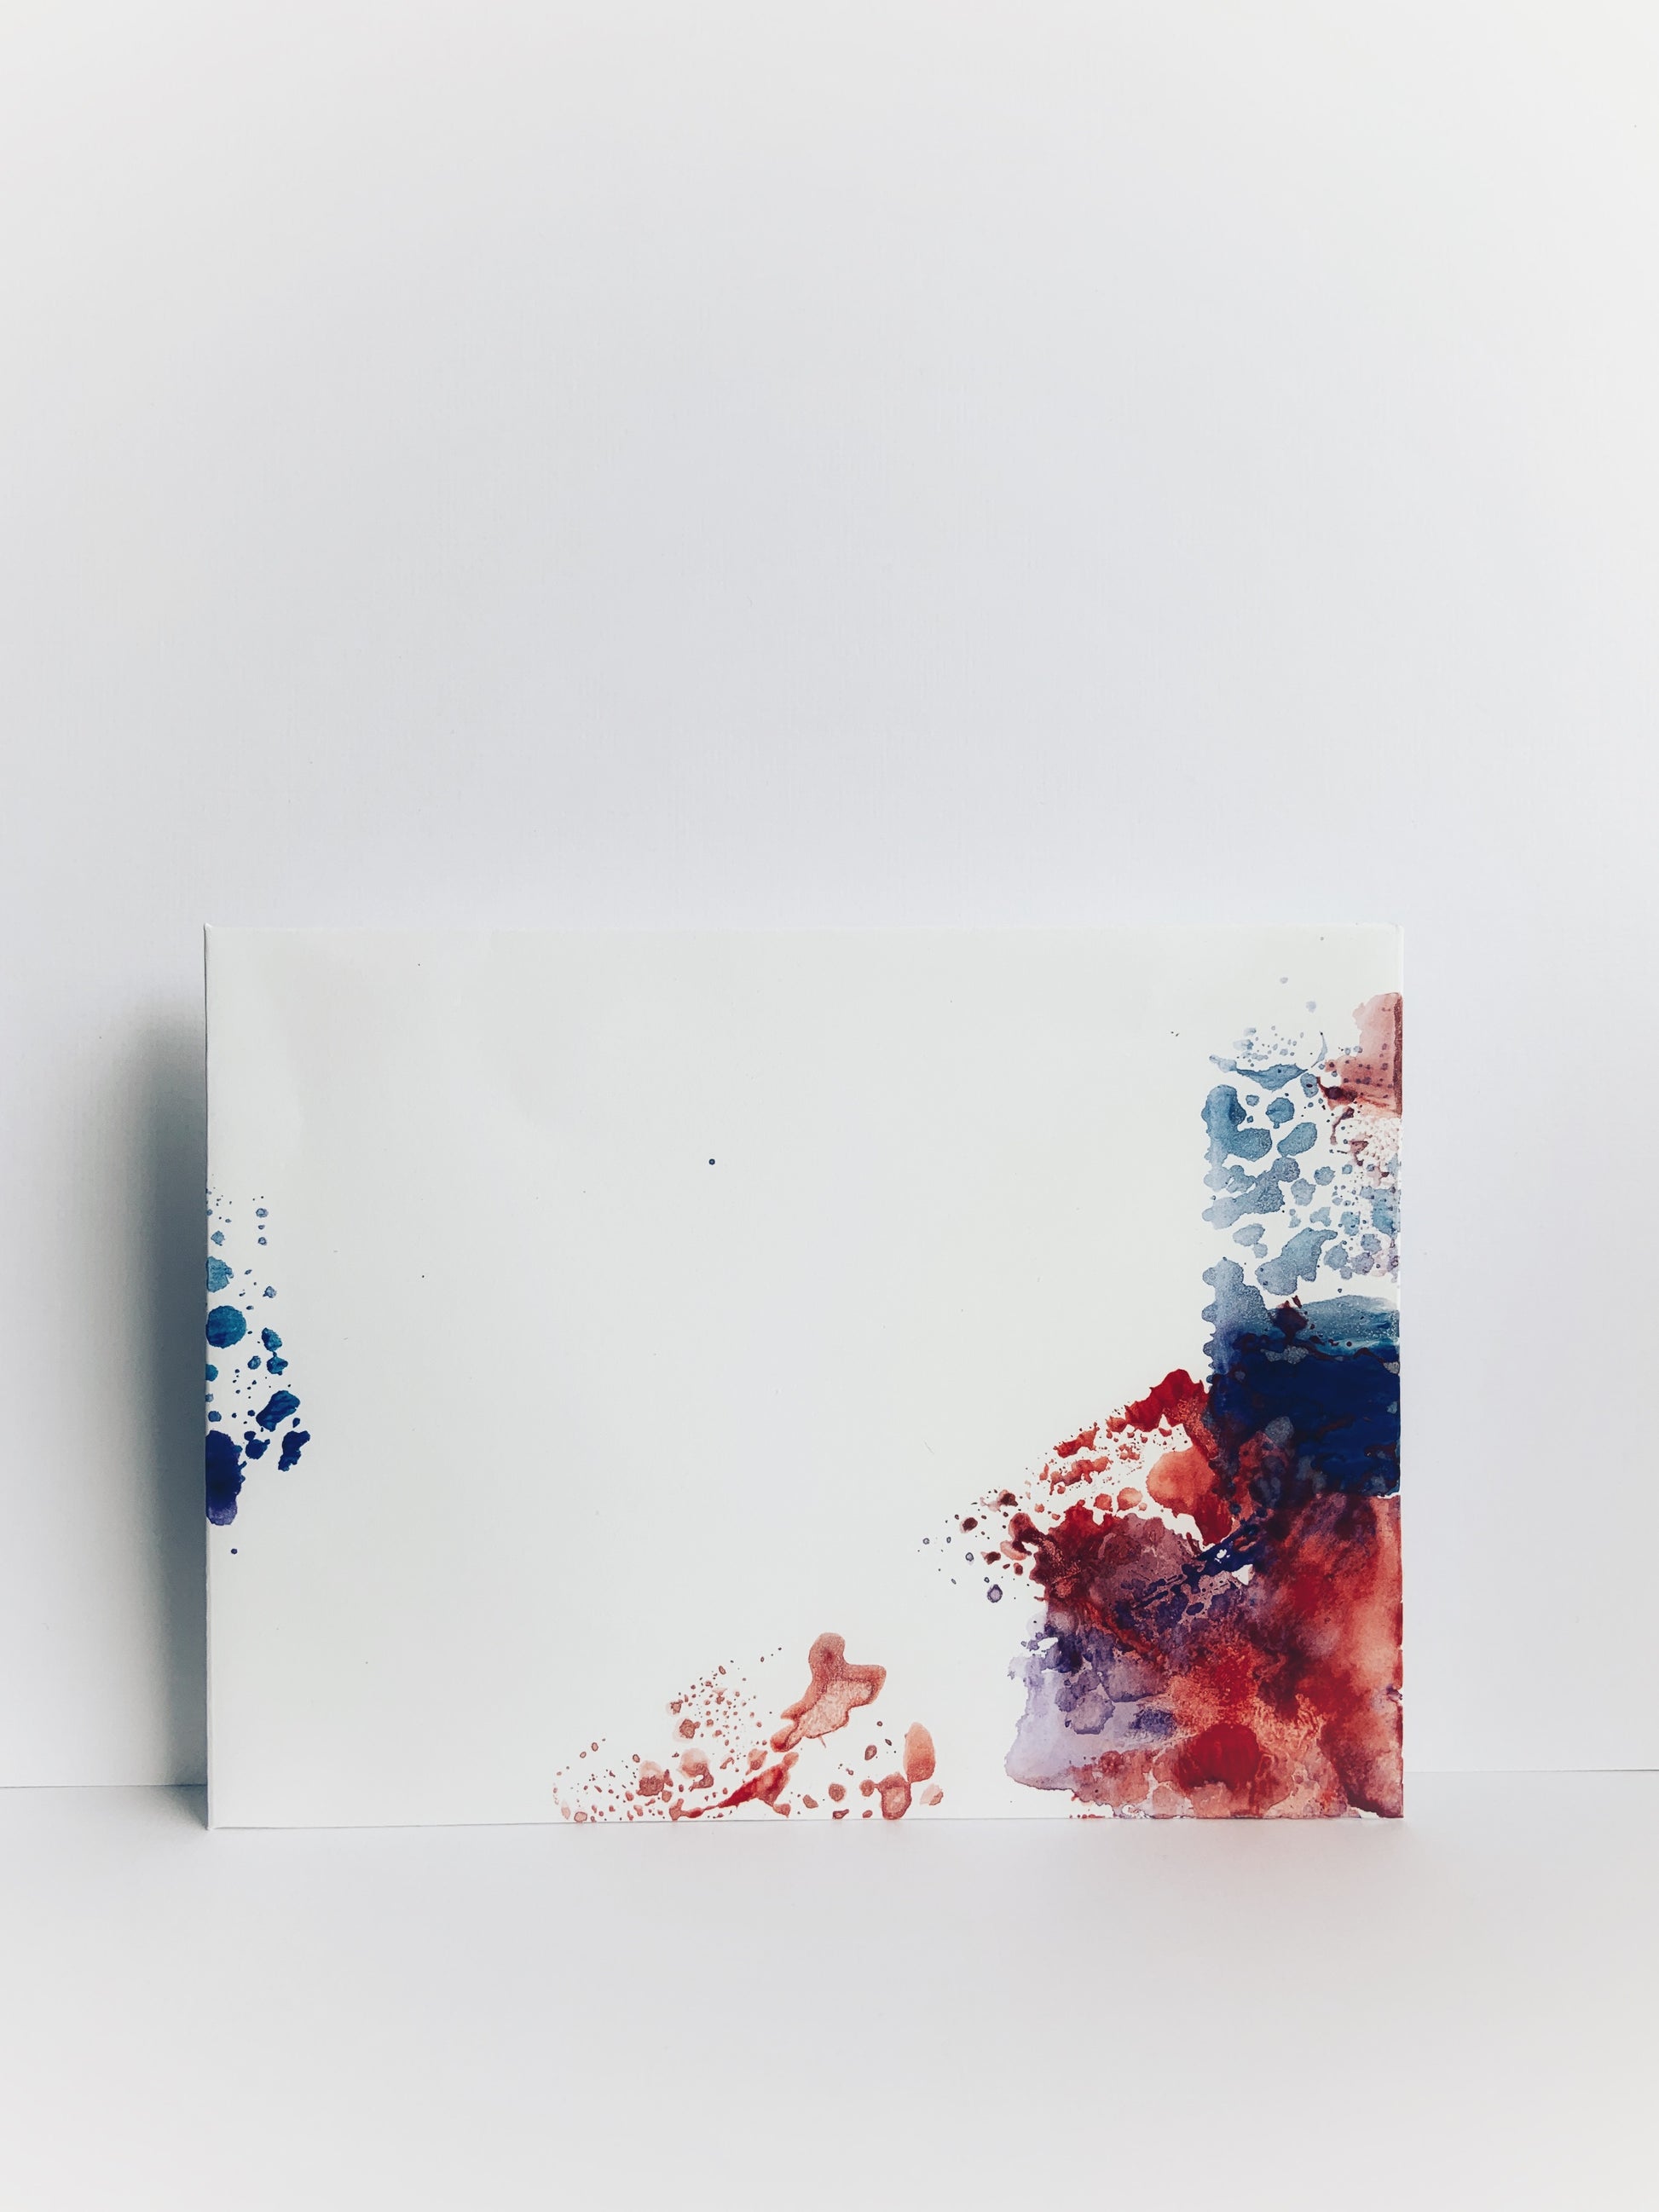 The front of a handmade envelope painted in blue and red watercolor